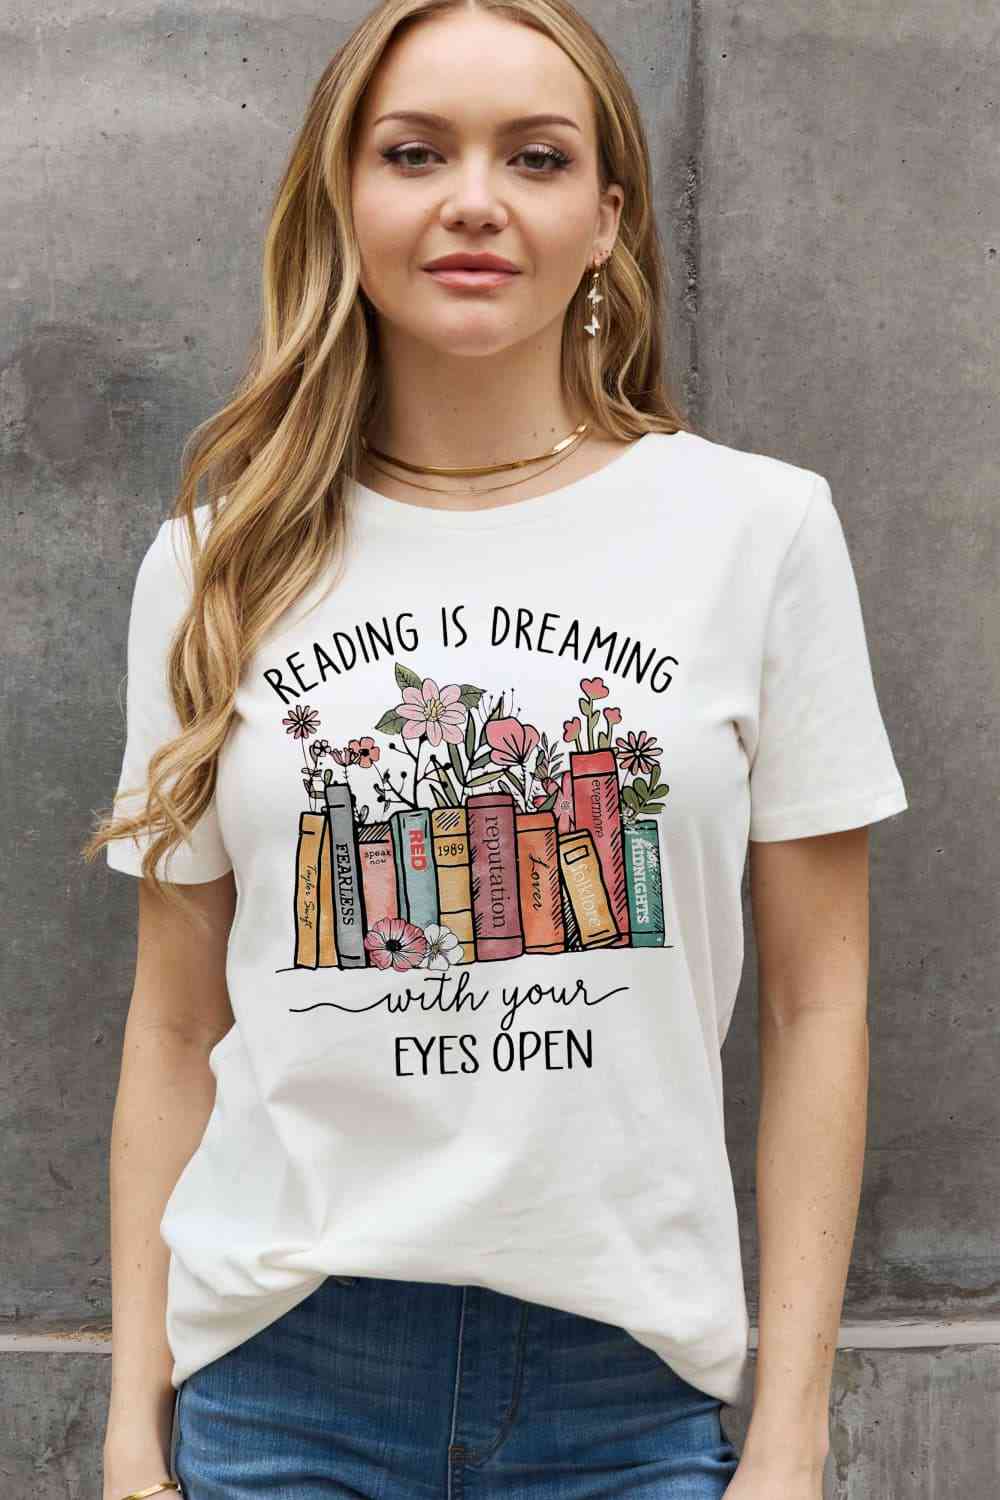 READING IS DREAMING WITH YOUR EYES OPEN Graphic Cotton Tee - Bleach / S - T-Shirts - Shirts & Tops - 19 - 2024